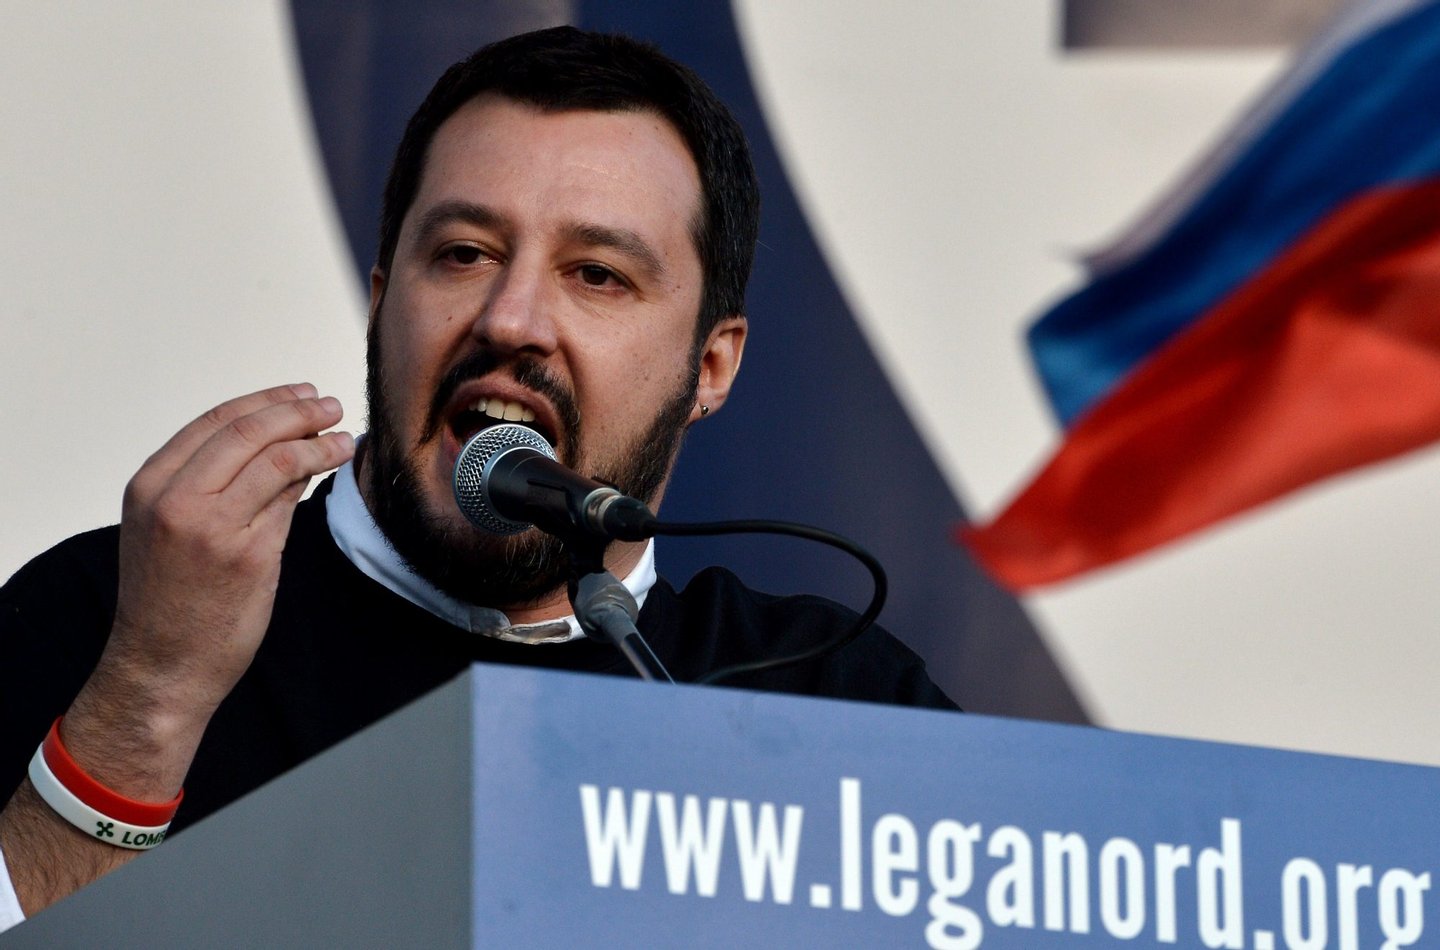 Italian Northern League (Lega Nord) party leader Matteo Salvini speaks during a rally against the Italian government's policy in Rome on February 28, 2015. AFP PHOTO / TIZIANA FABI (Photo credit should read TIZIANA FABI/AFP/Getty Images)